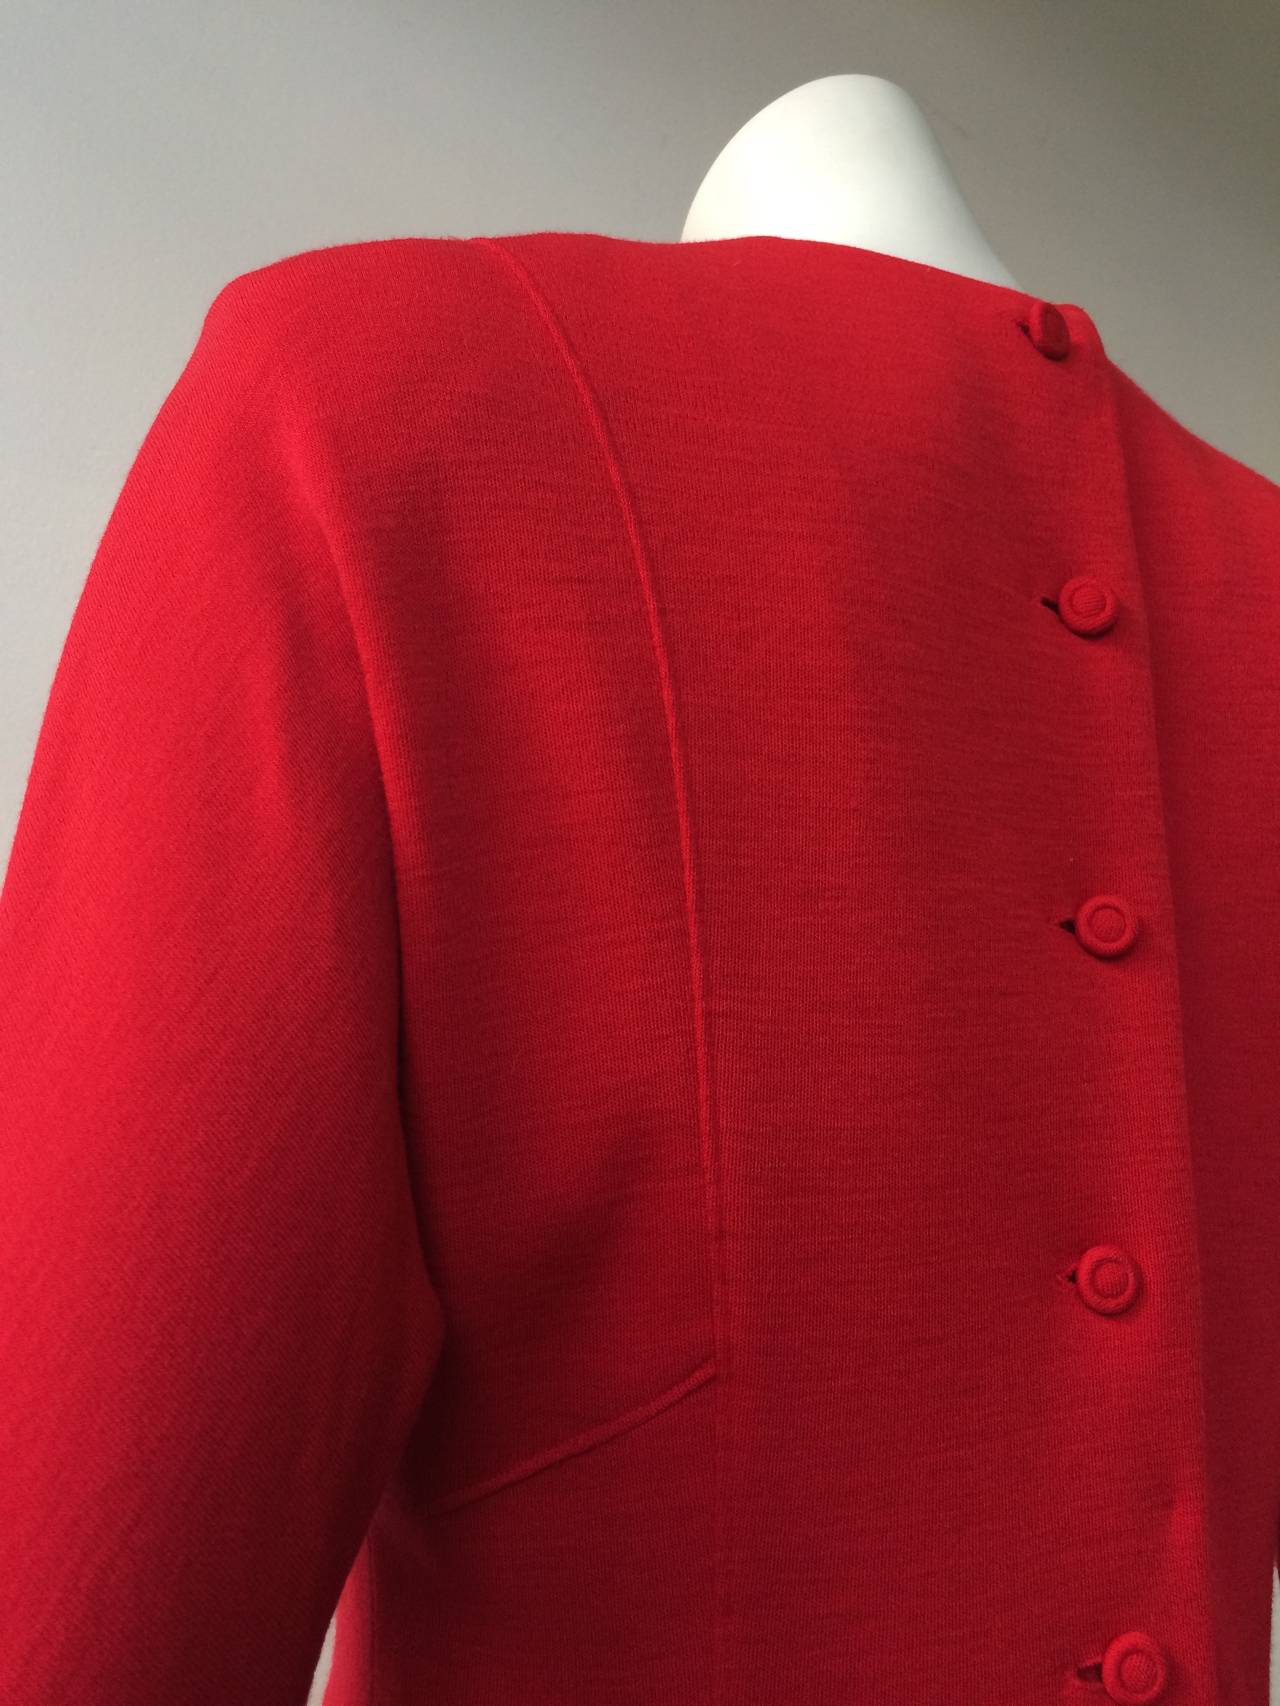  Hanae Mori for Neiman Marcus 1980s Red Wool Jersey Dress Size 6. For Sale 2